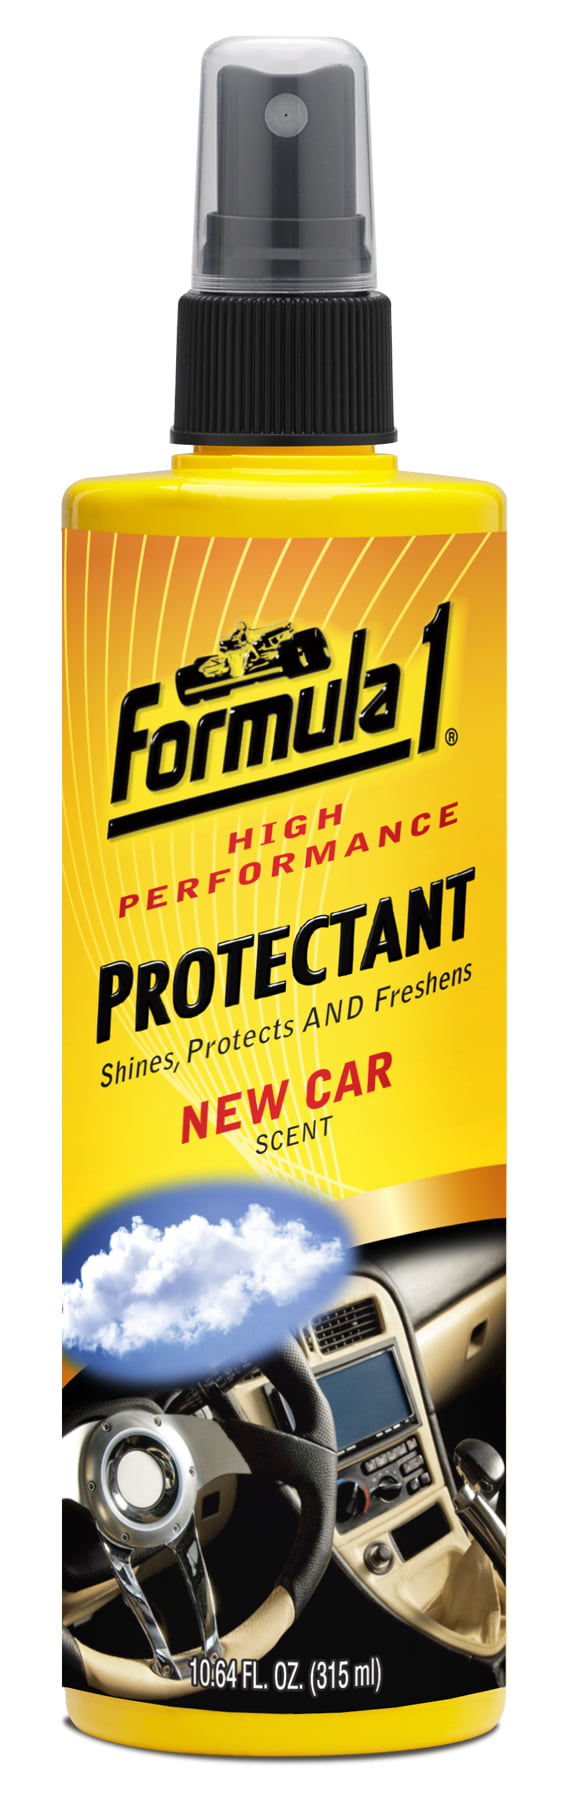 Formula 1 Protectant – High Performance Car Cleaner – Car Cleaning Spray to  Shine & Protect – Multi-Surface Car Cleaning Supplies w/Silicone